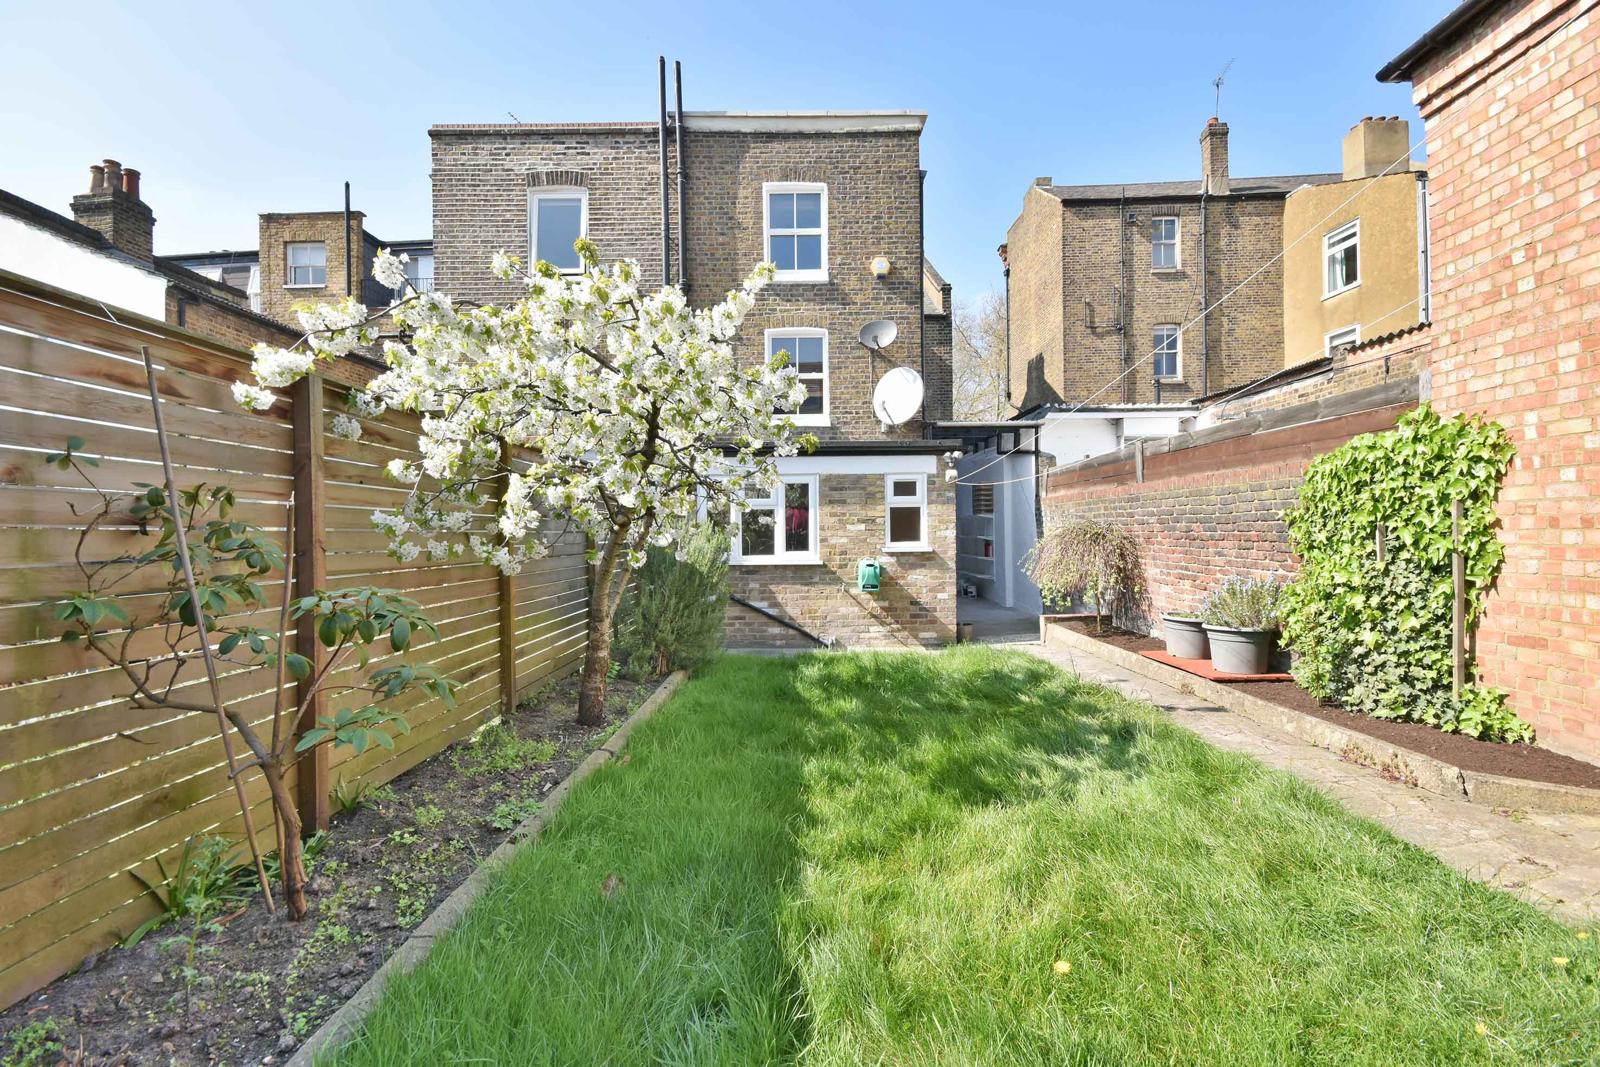 4 bed Semi-Detached House for rent in Hampstead. From PropertyLoop